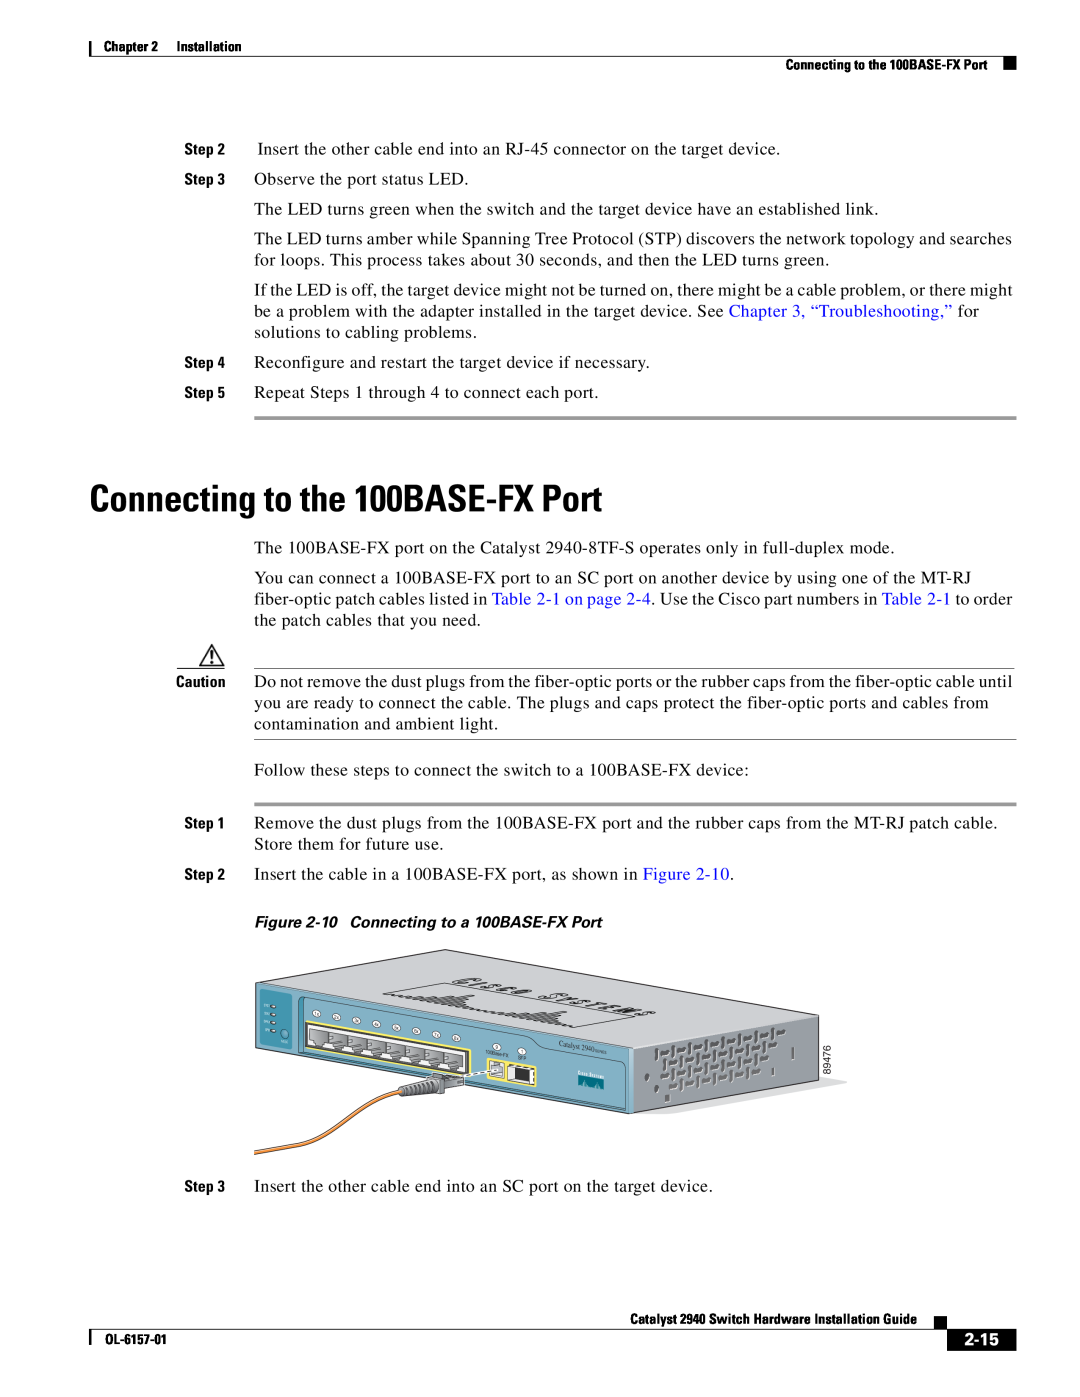 Cisco Systems OL-6157-01 manual Connecting to the 100BASE-FX Port, 2-15, 10 Connecting to a 100BASE-FX Port 